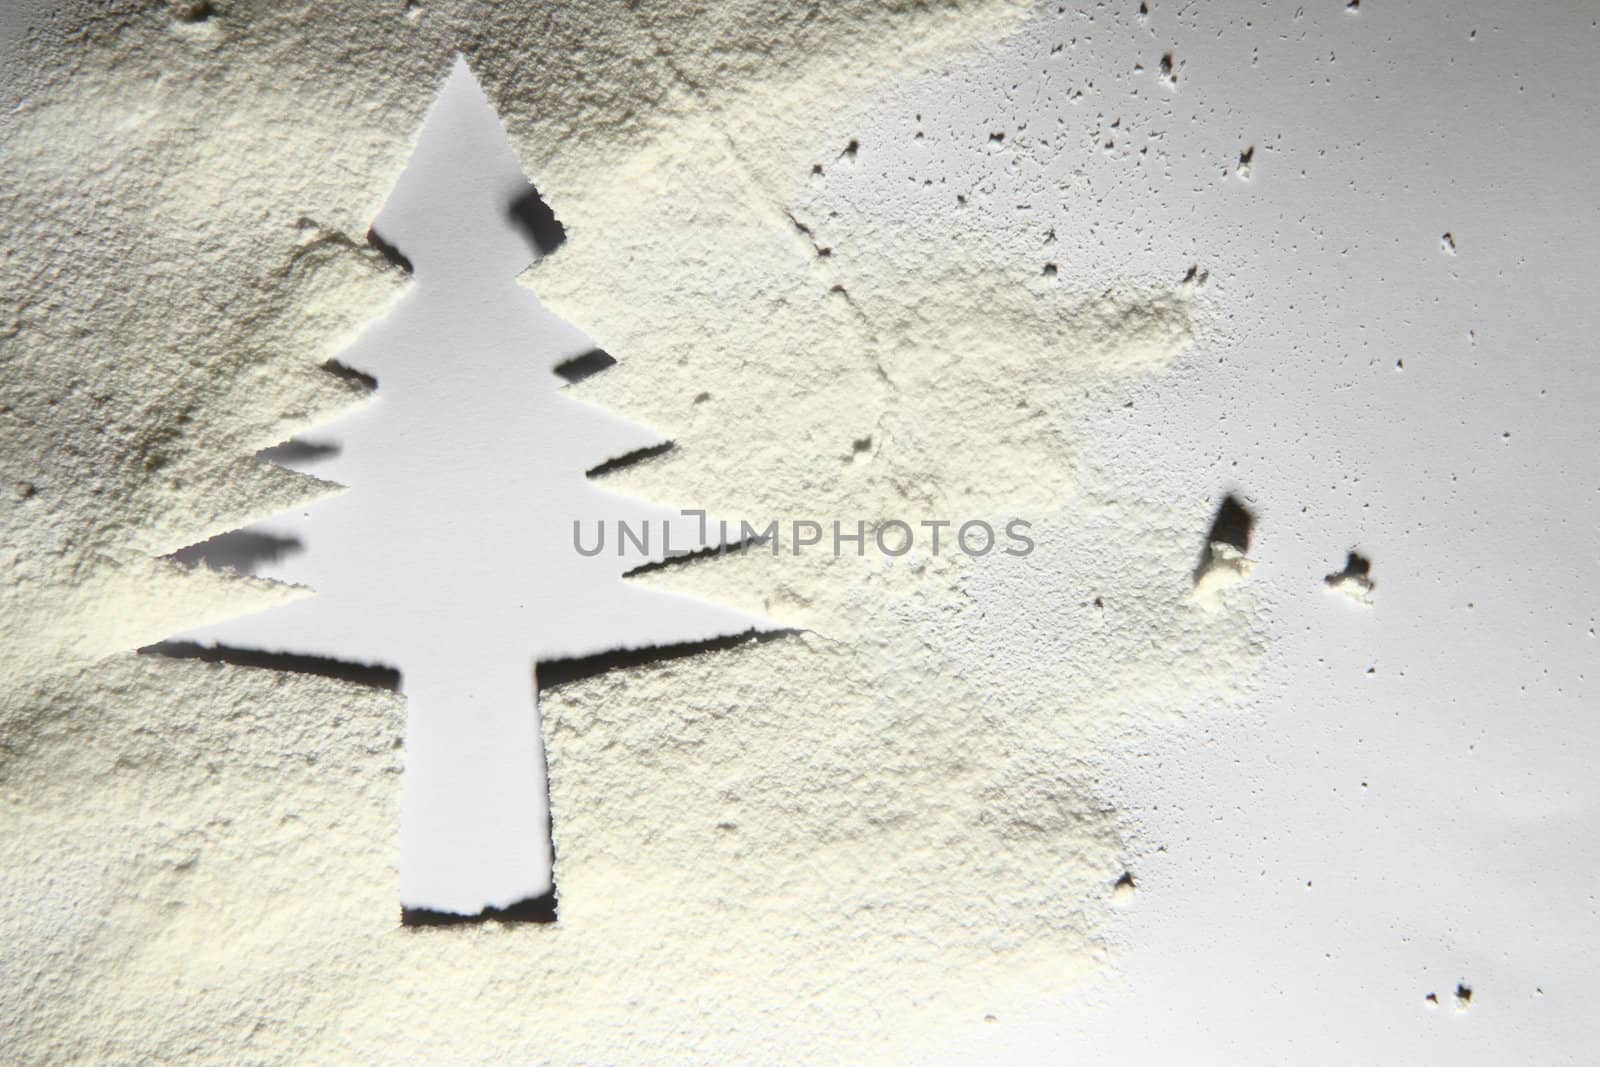 christmas tree from the paper and snow by jonnysek